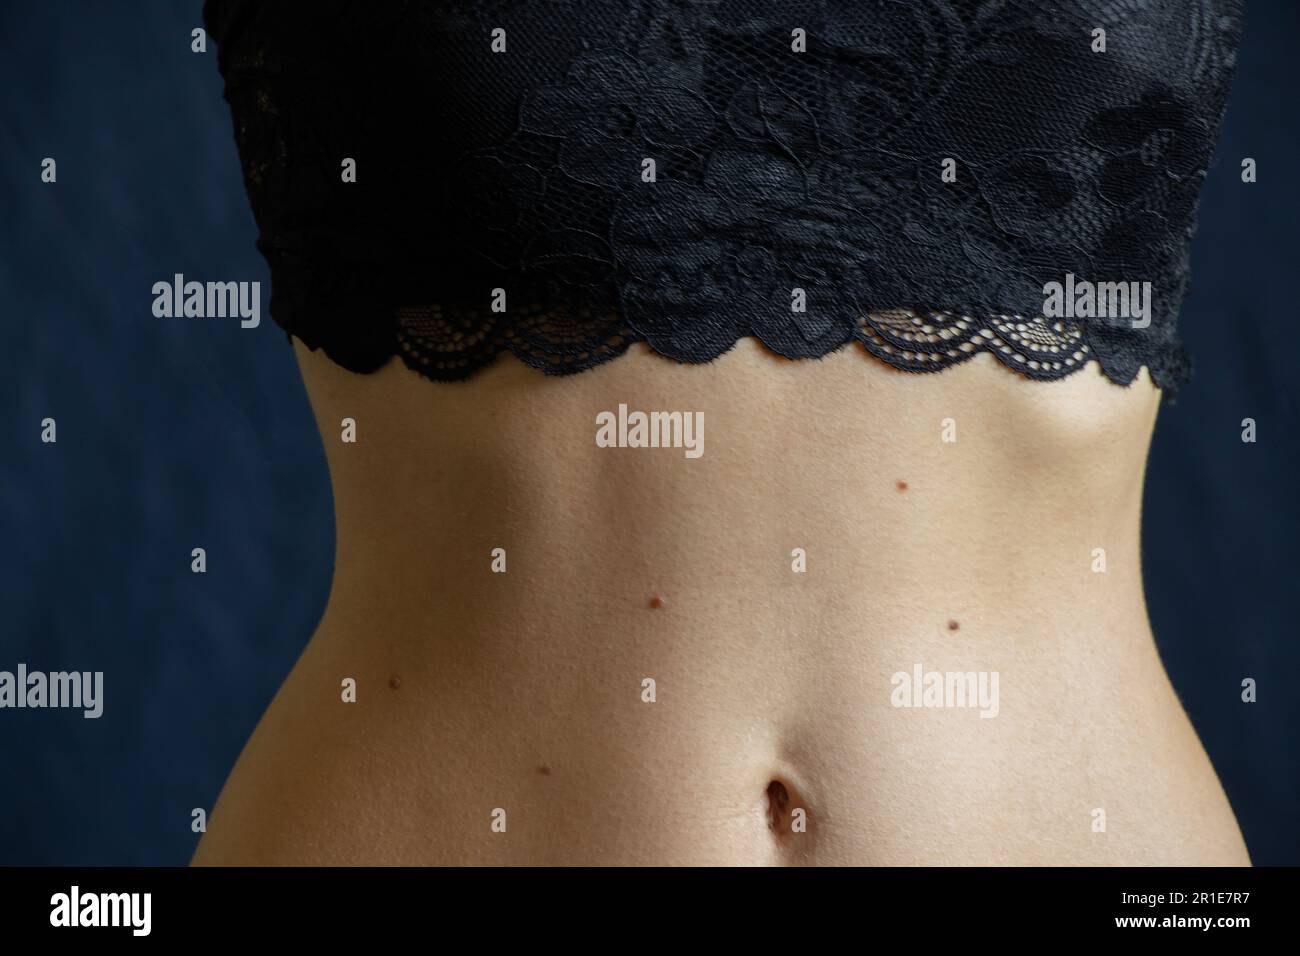 navel and belly of a young girl close up on a dark background Stock Photo